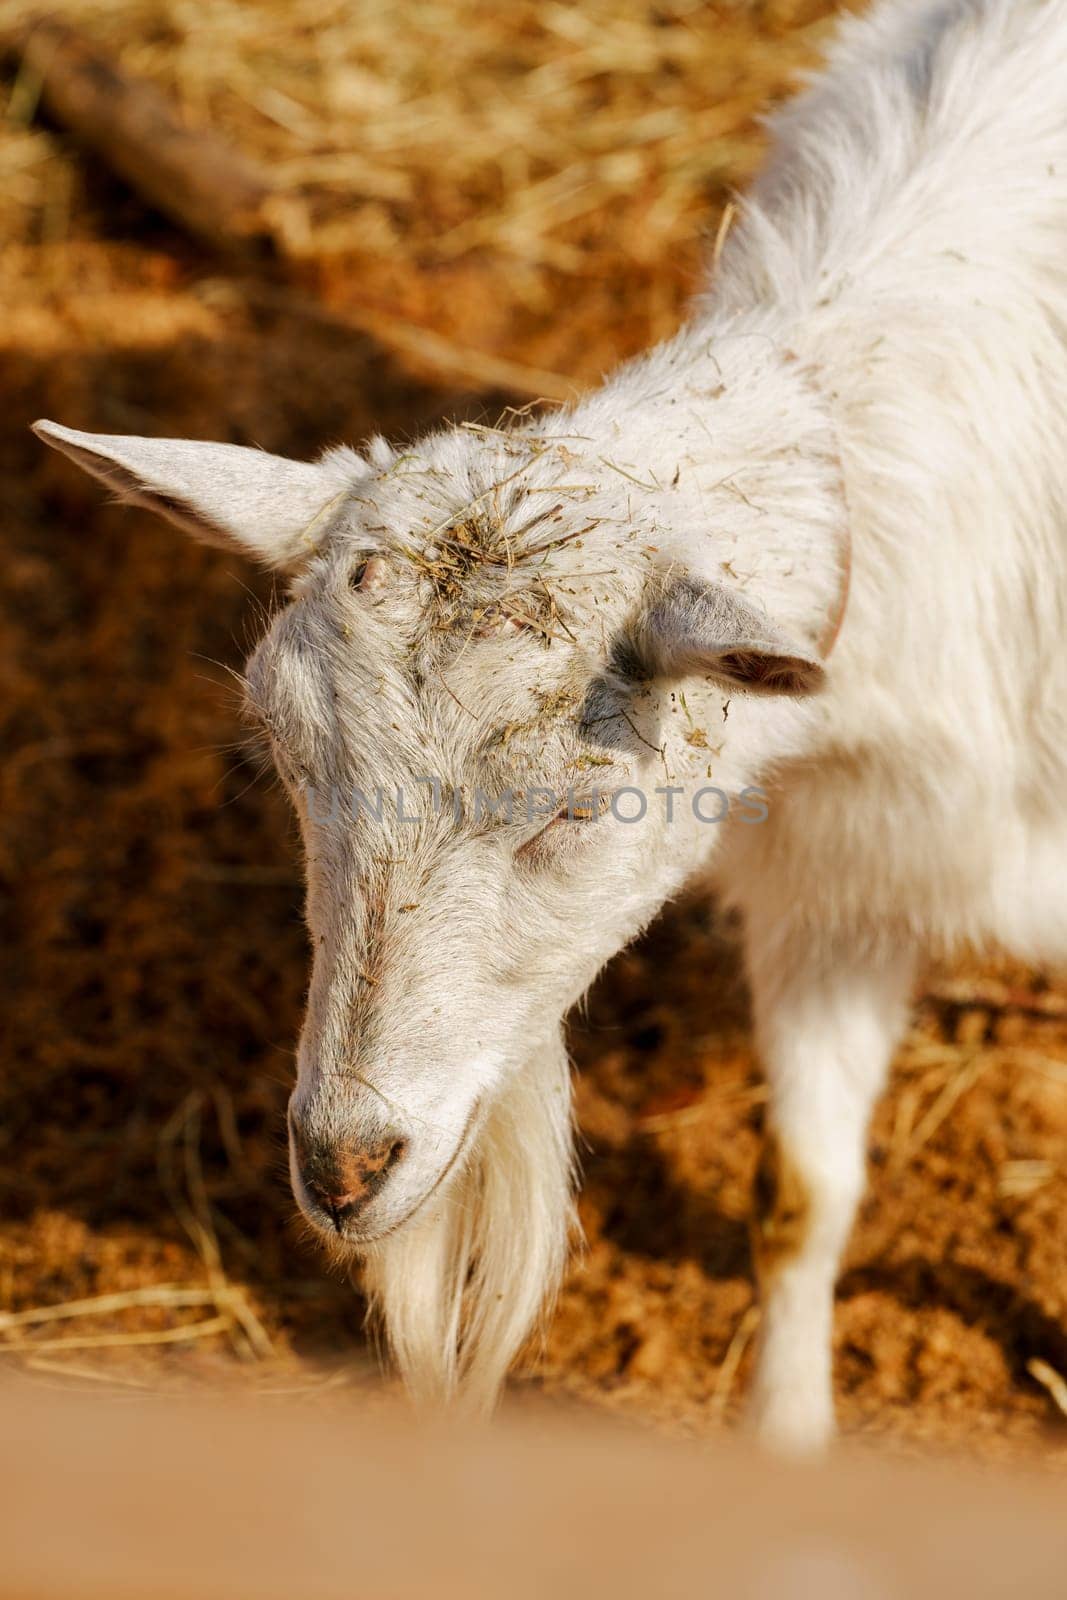 Goat peacefully grazing in field under the warm sunlight, showcasing its beauty and tranquility. by darksoul72